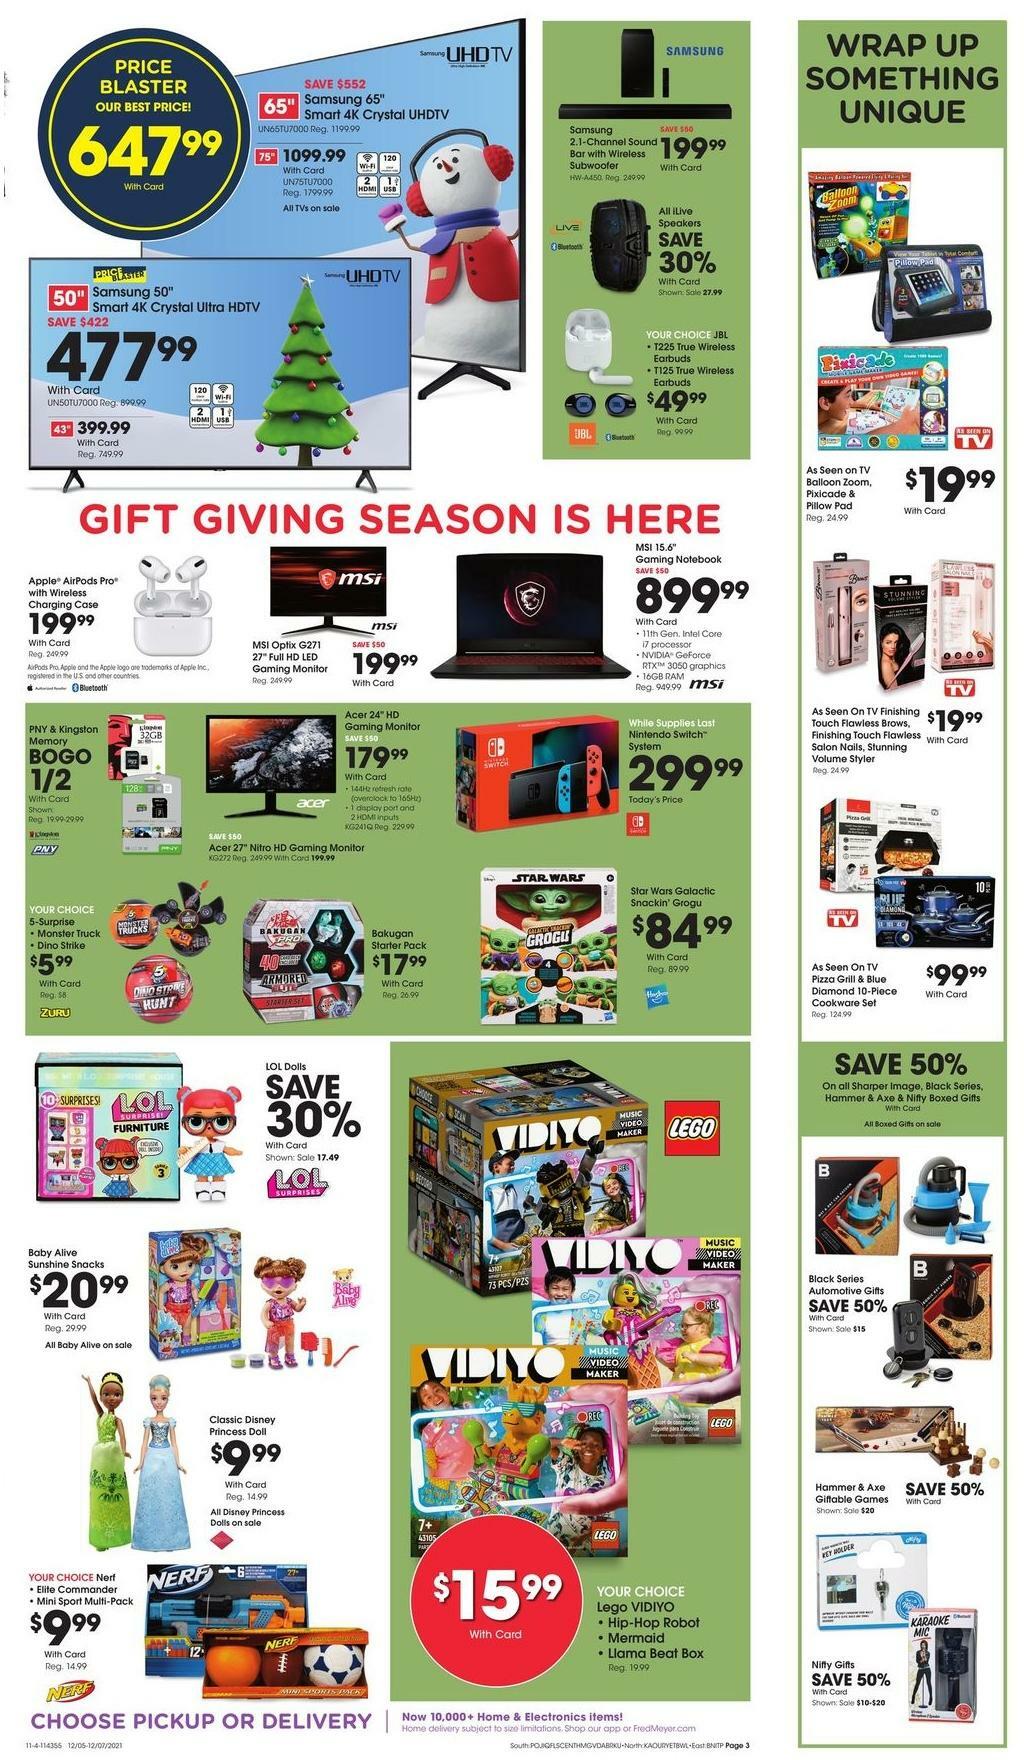 Fred Meyer 3-Day Sale Weekly Ad from December 5